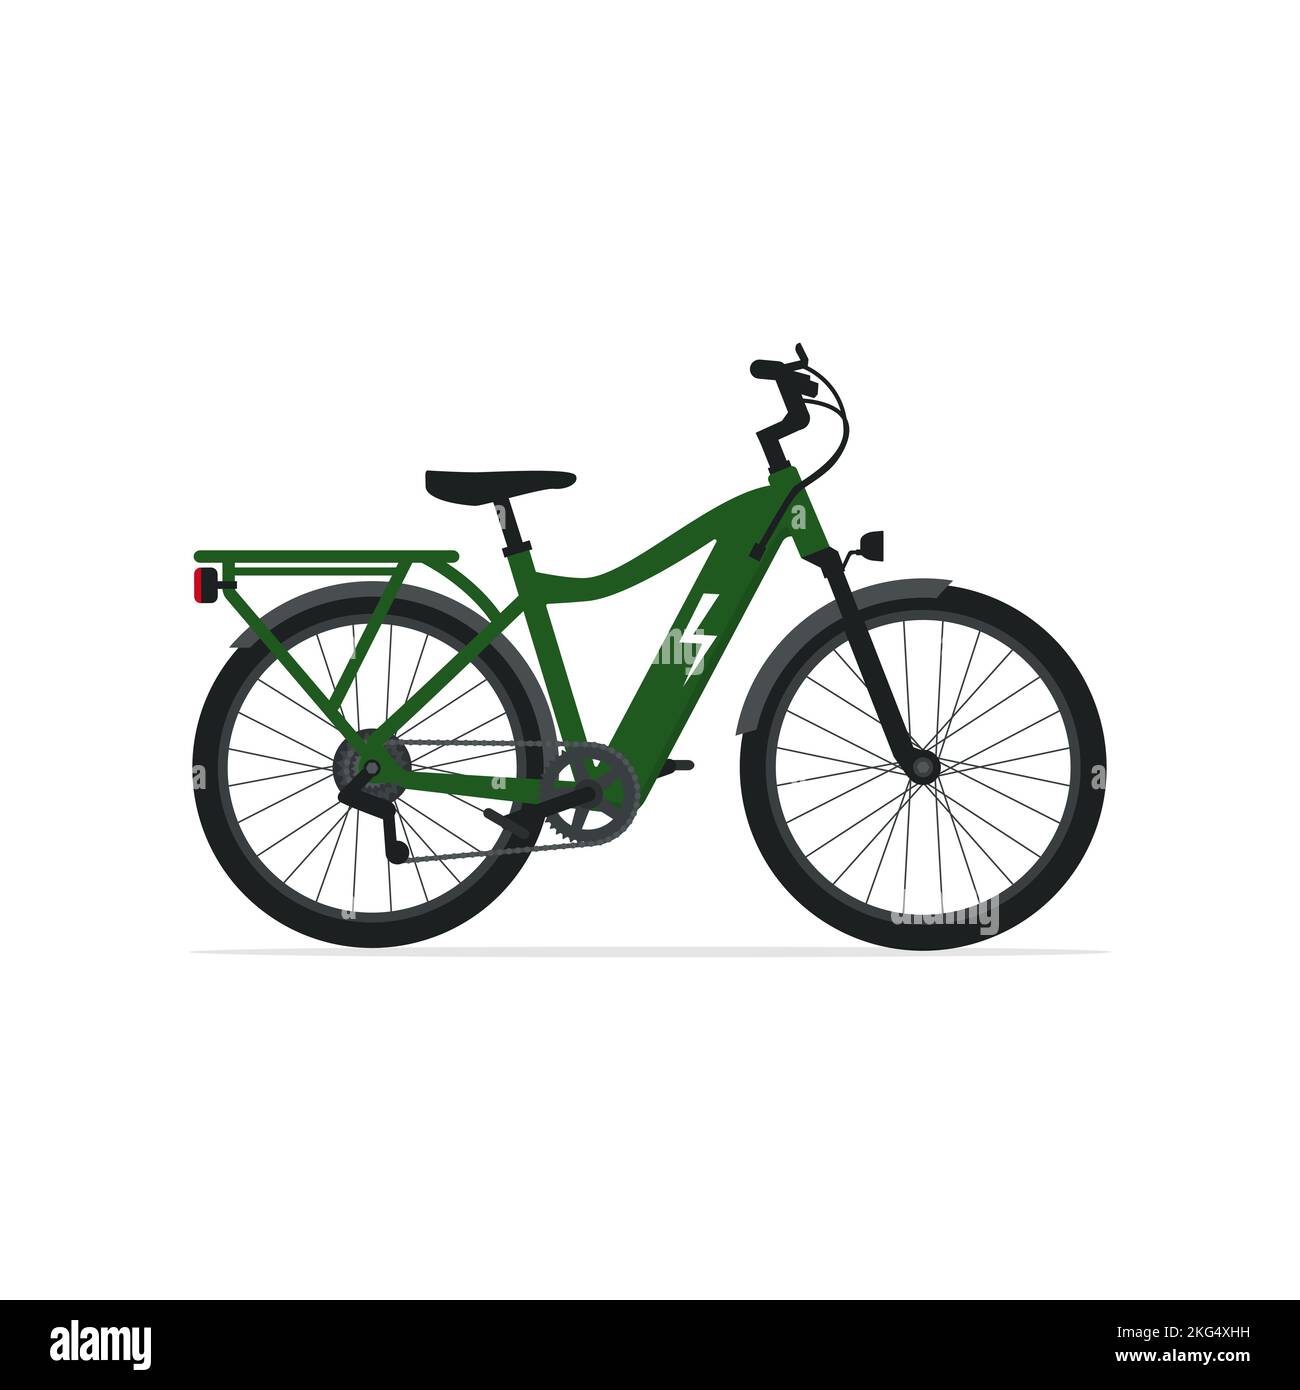 Electric bicycle isolated on white background, environment and mobility concept Stock Vector